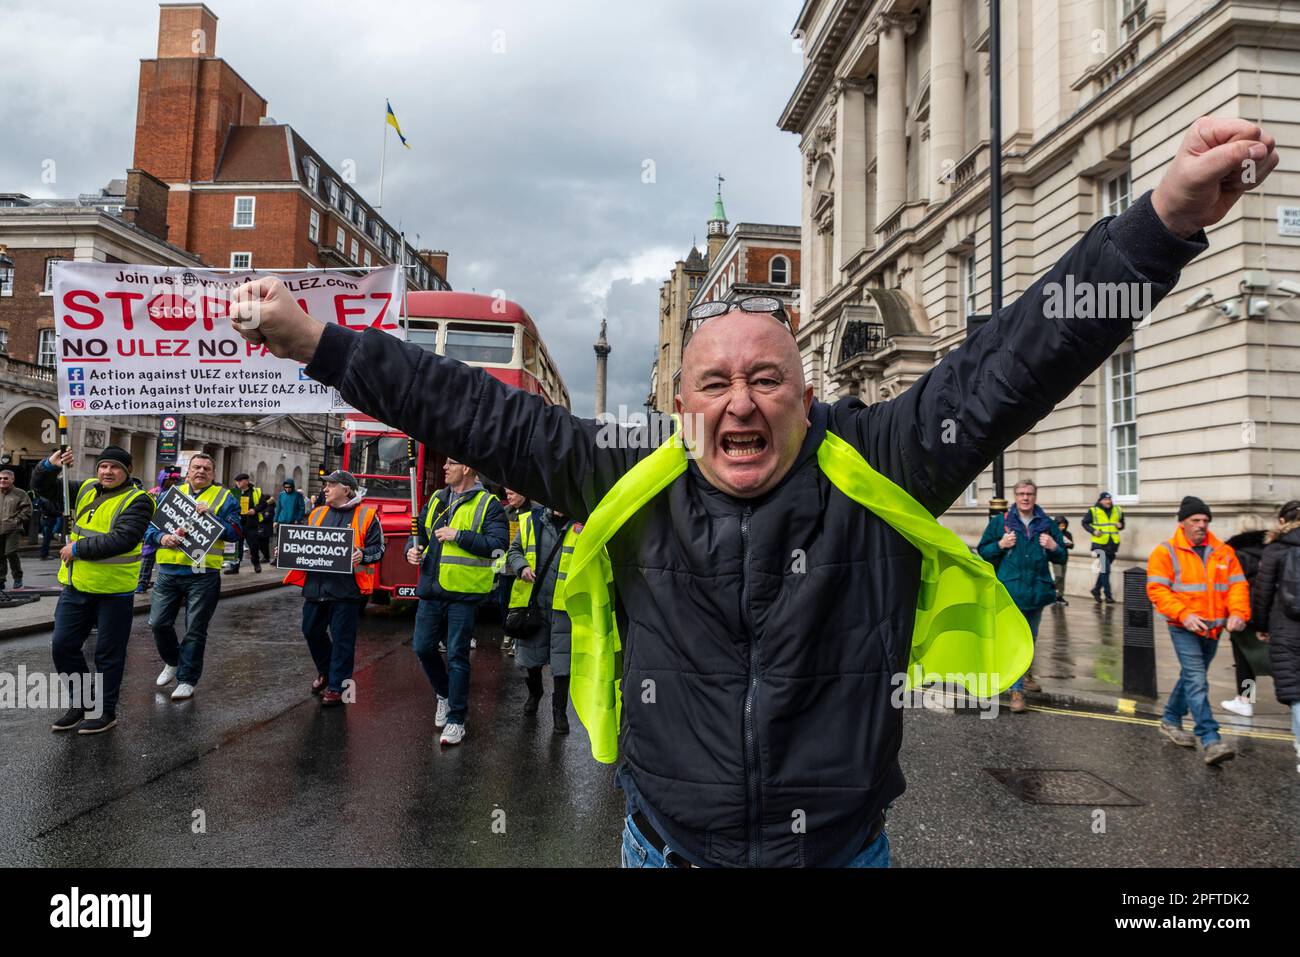 Protest against ULEZ zone expansion in London, UK. Angry Caucasian white male at head of protesters and Routemaster bus Stock Photo